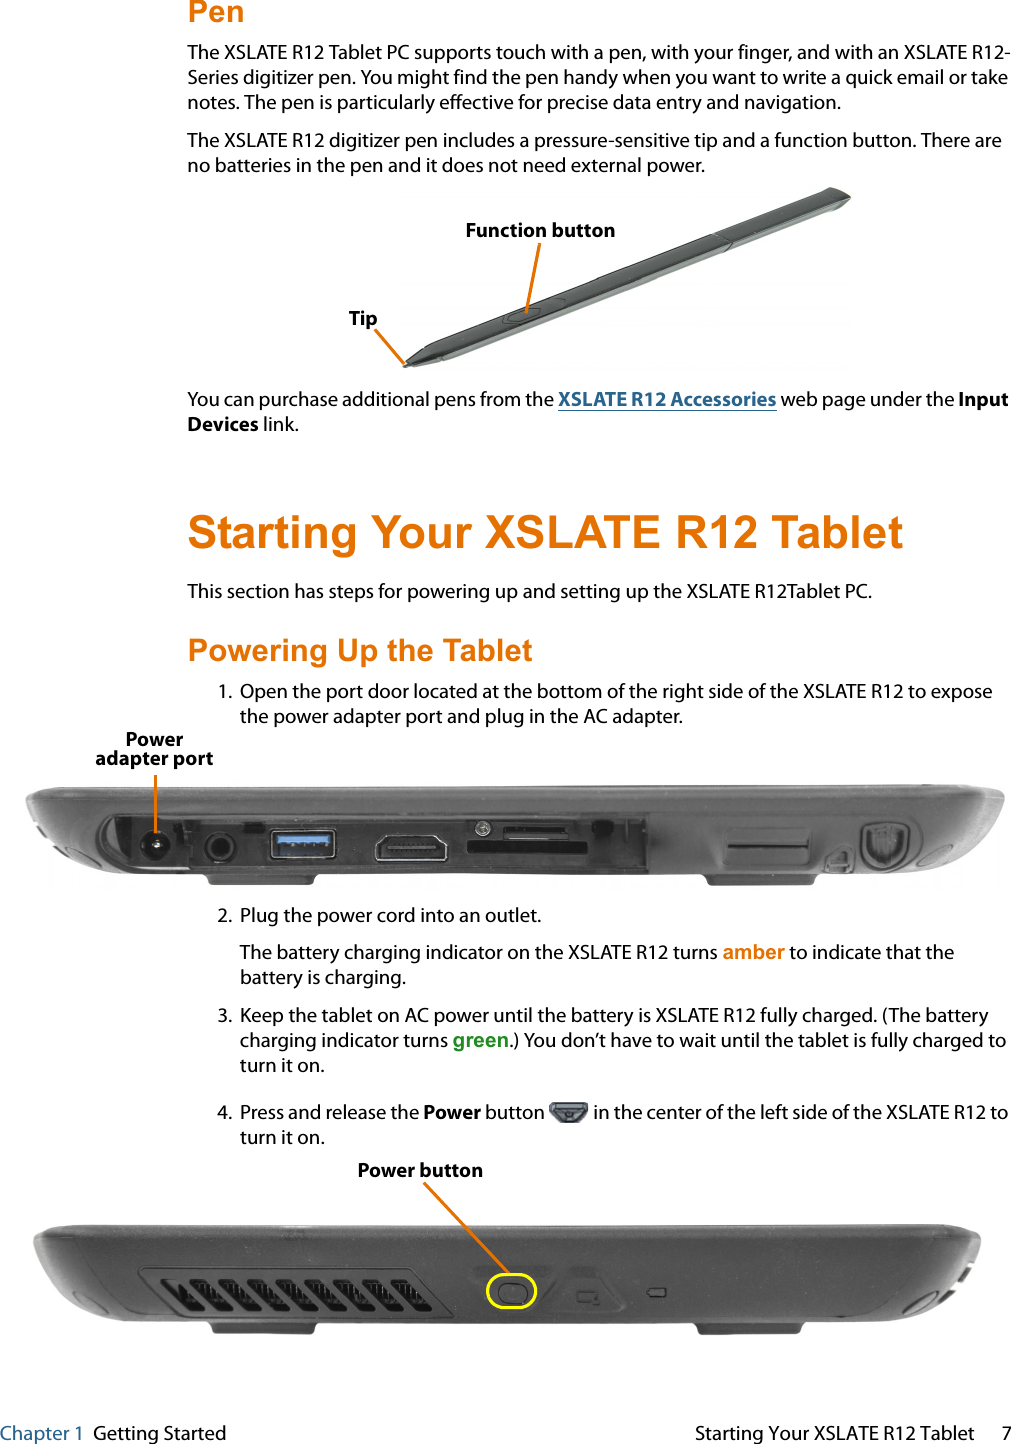 Chapter 1  Getting Started Starting Your XSLATE R12 Tablet 7Pen The XSLATE R12 Tablet PC supports touch with a pen, with your finger, and with an XSLATE R12-Series digitizer pen. You might find the pen handy when you want to write a quick email or take notes. The pen is particularly effective for precise data entry and navigation. The XSLATE R12 digitizer pen includes a pressure-sensitive tip and a function button. There are no batteries in the pen and it does not need external power.  TipFunction button You can purchase additional pens from the XSLATE R12 Accessories web page under the Input Devices link. Starting Your XSLATE R12 Tablet This section has steps for powering up and setting up the XSLATE R12Tablet PC.   Powering Up the Tablet 1. Open the port door located at the bottom of the right side of the XSLATE R12 to expose the power adapter port and plug in the AC adapter. Poweradapter port 2. Plug the power cord into an outlet. The battery charging indicator on the XSLATE R12 turns amber to indicate that the battery is charging. 3. Keep the tablet on AC power until the battery is XSLATE R12 fully charged. (The battery charging indicator turns green.) You don’t have to wait until the tablet is fully charged to turn it on. 4. Press and release the Power button   in the center of the left side of the XSLATE R12 to turn it on. Power button 